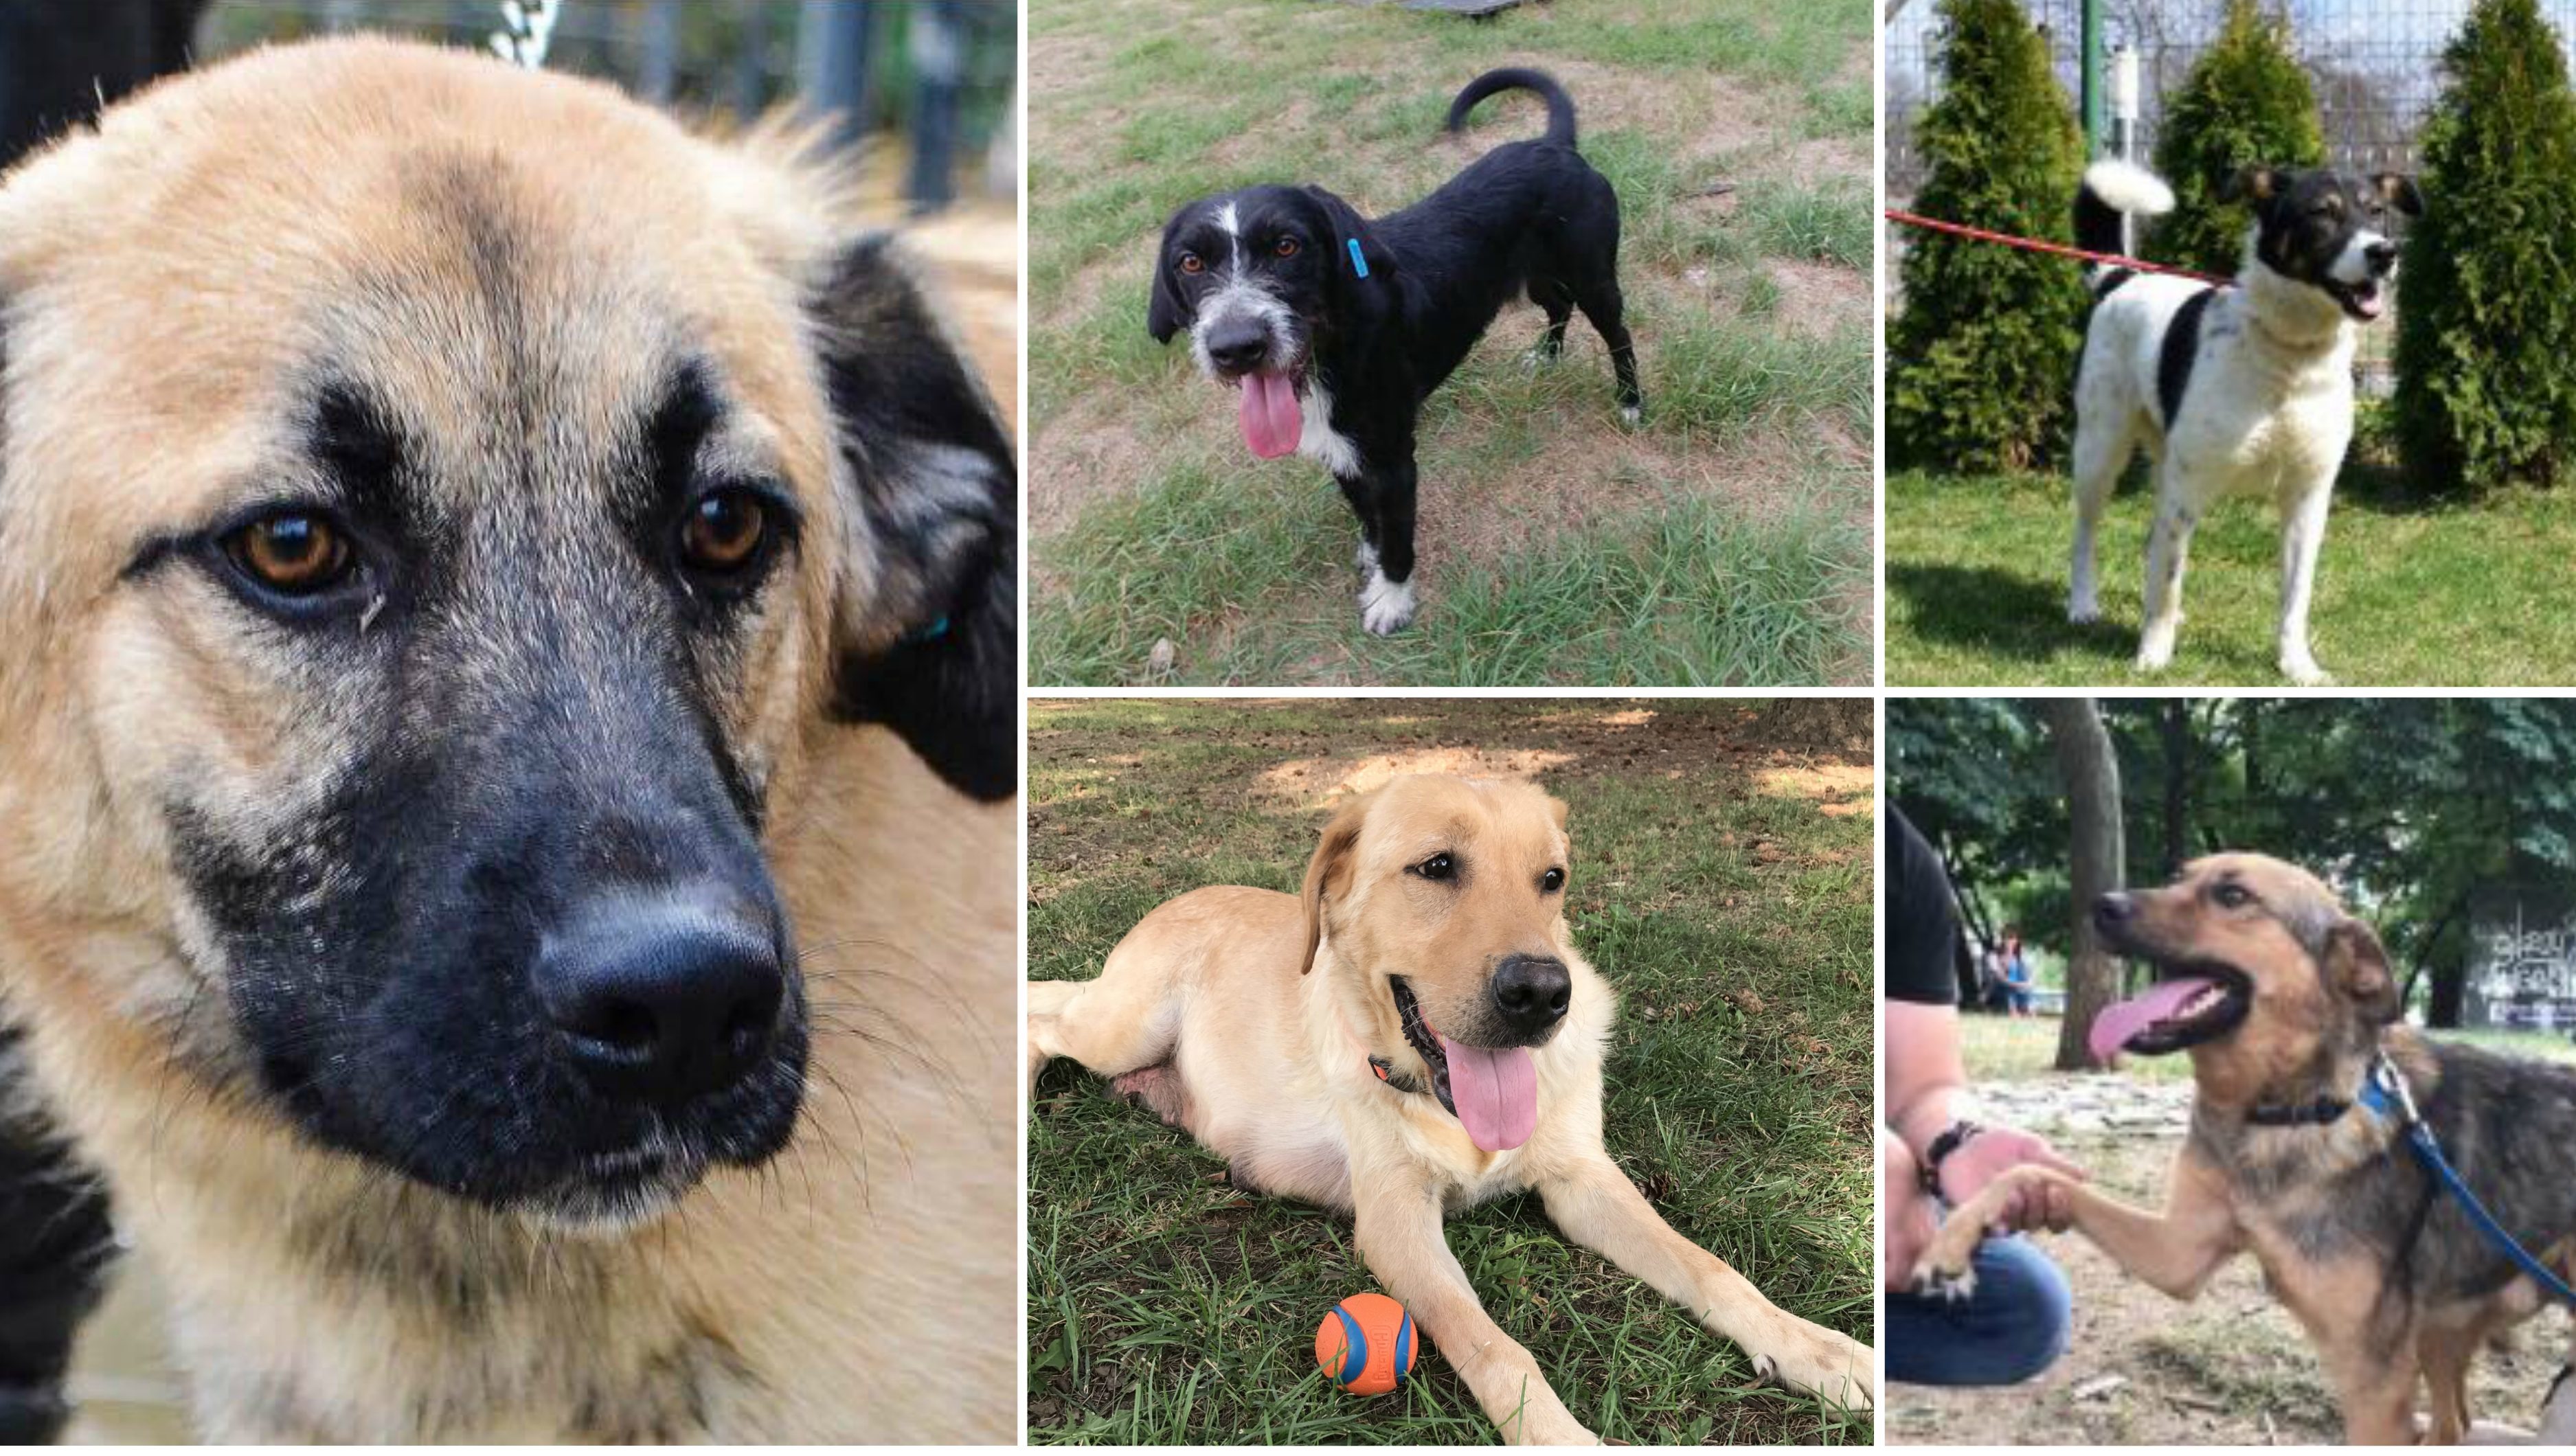 The dogs in need of homes: Eddie, Charlie, Nadia, Cicio and Amor.